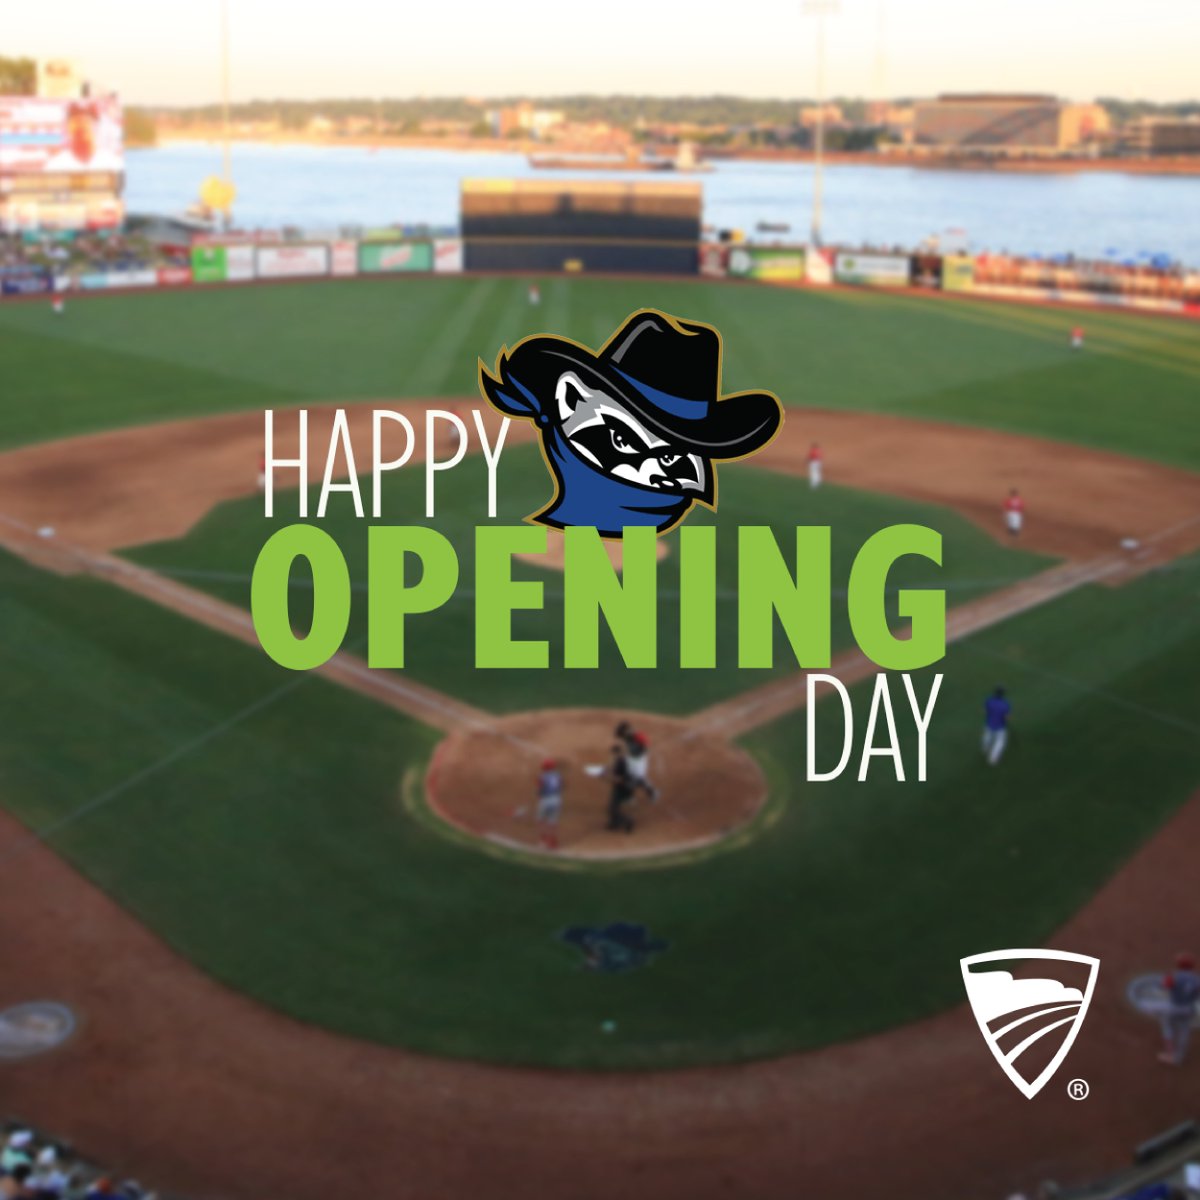 Happy opening day to the Quad Cities River Bandits! Our sponsorship with Modern Woodmen Park has been a home run since 2008! And the park just ranked #1 on USA Today's Best Minor League ballpark list! milb.com/quad-cities/ne…